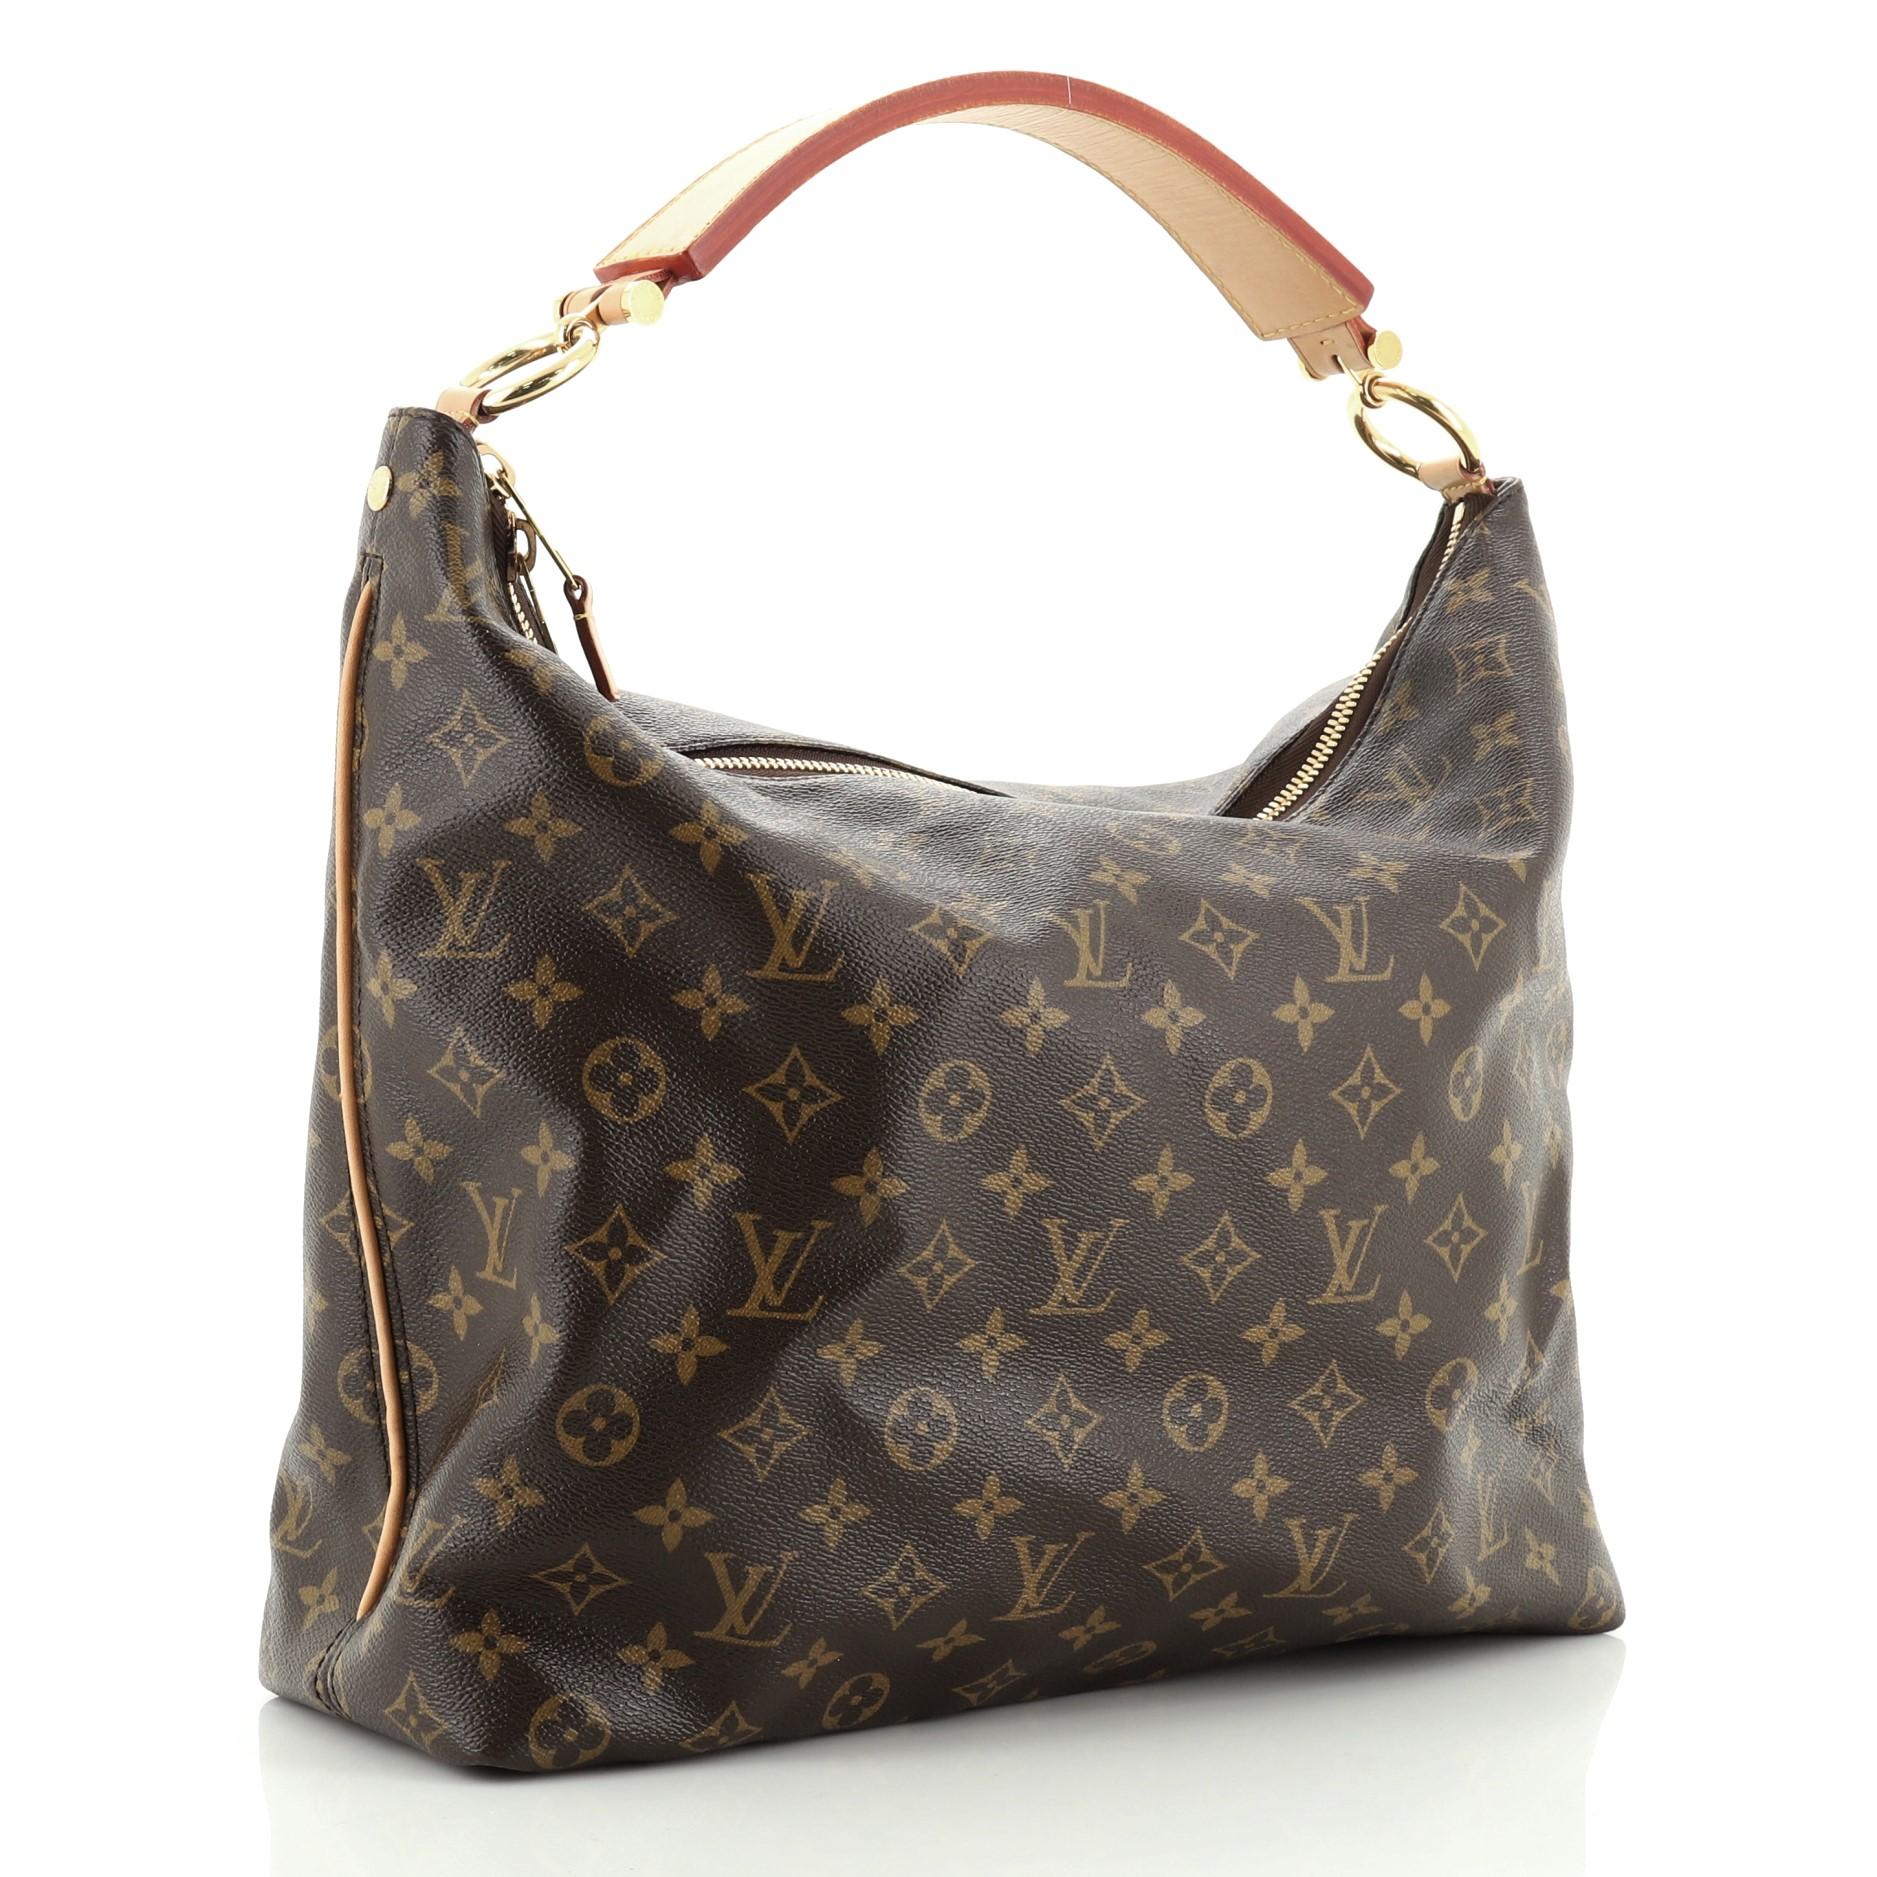 This Louis Vuitton Sully Handbag Monogram Canvas MM, crafted from brown monogram coated canvas, features a thick vachetta cowhide looped strap and gold-tone hardware. Its two-way zip closure opens to a brown fabric interior with slip pockets.